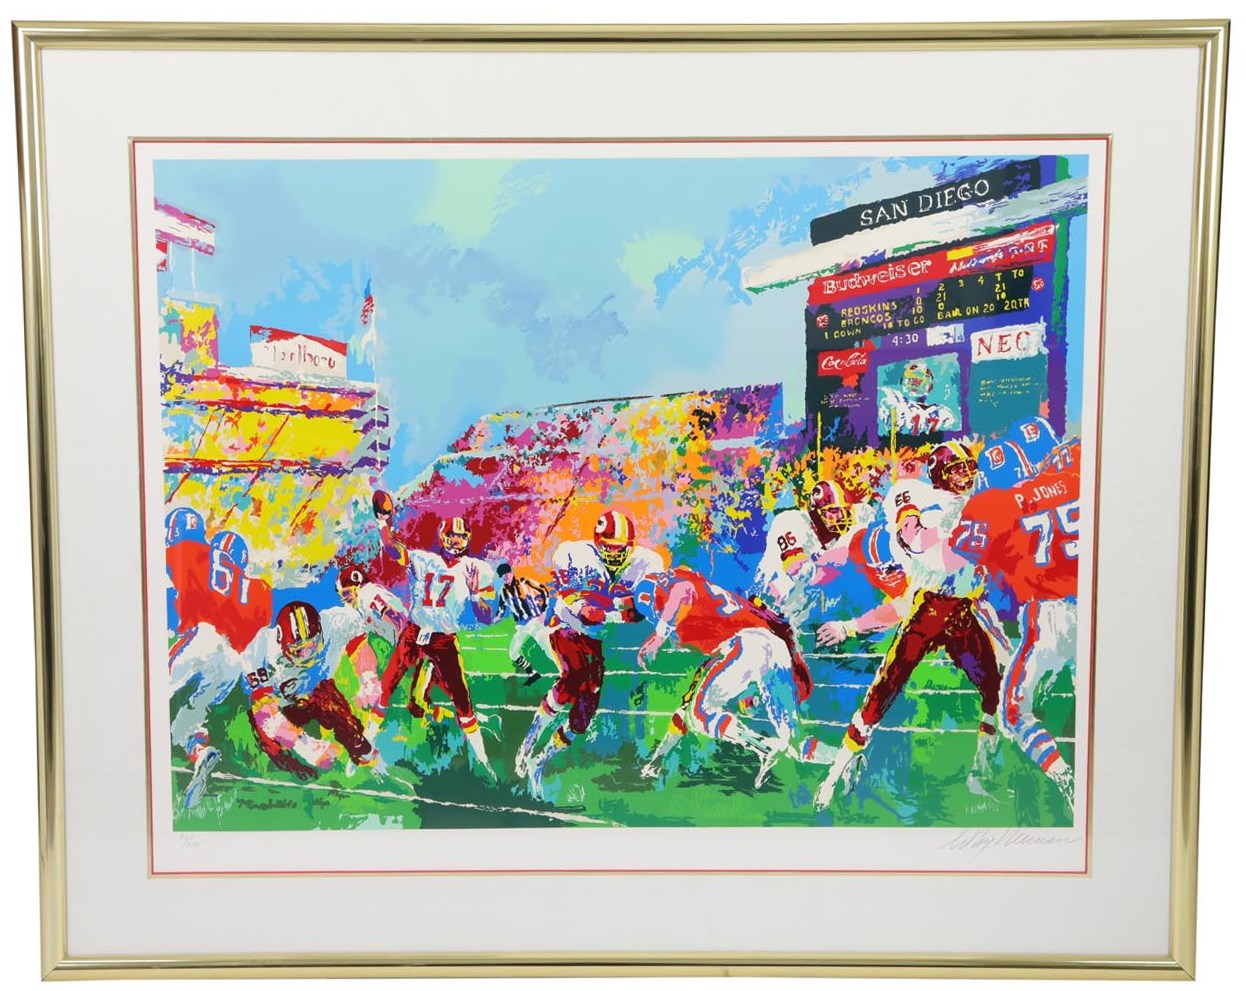 1988 LeRoy Neiman Signed "In the Pocket" Serigraph